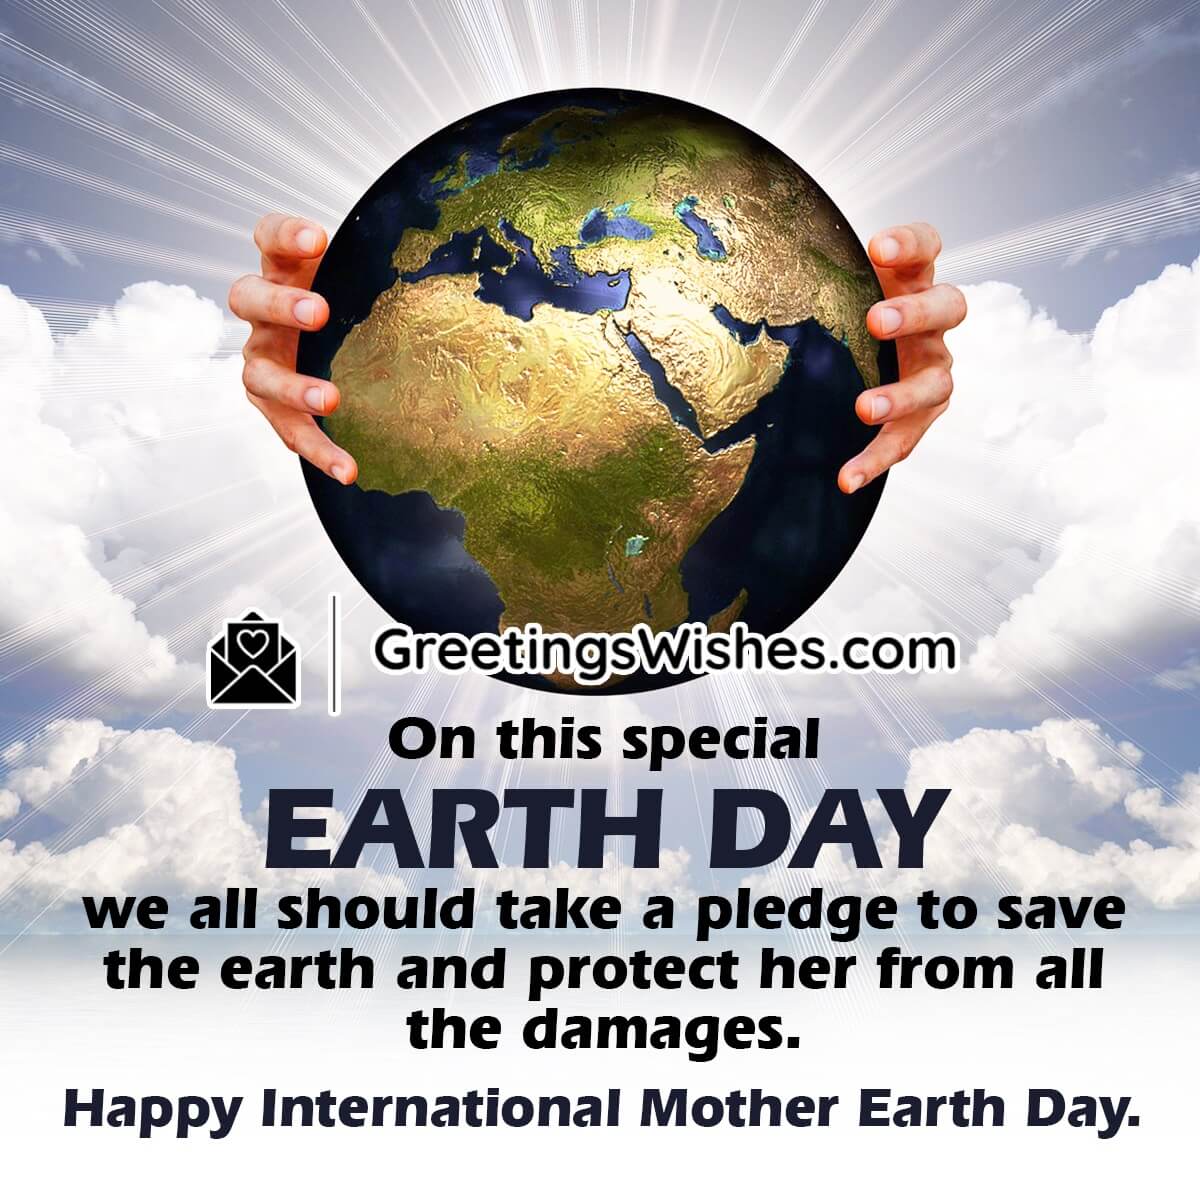 Happy International Mother Earth Day